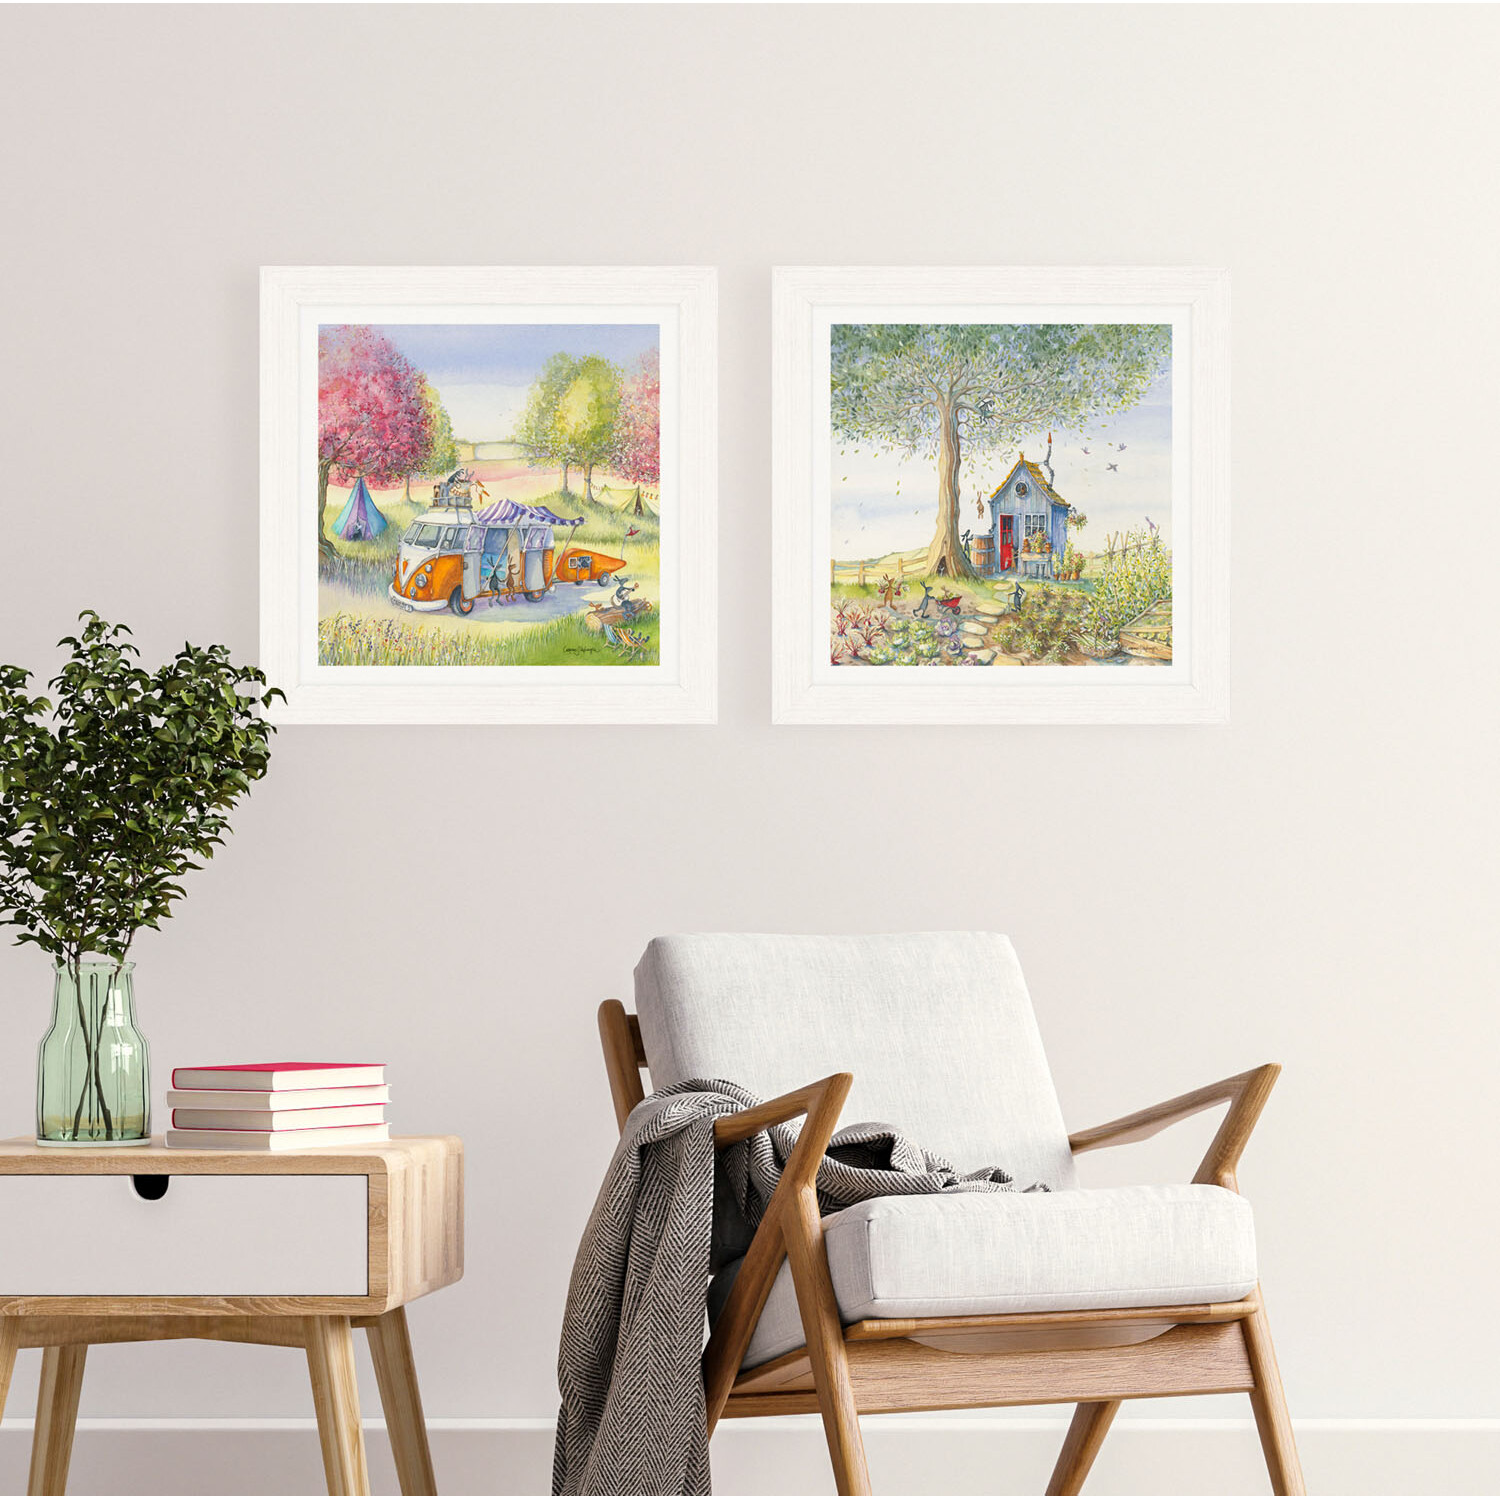 Single Catherine Stephenson Framed Wall Art in Assorted styles Image 4